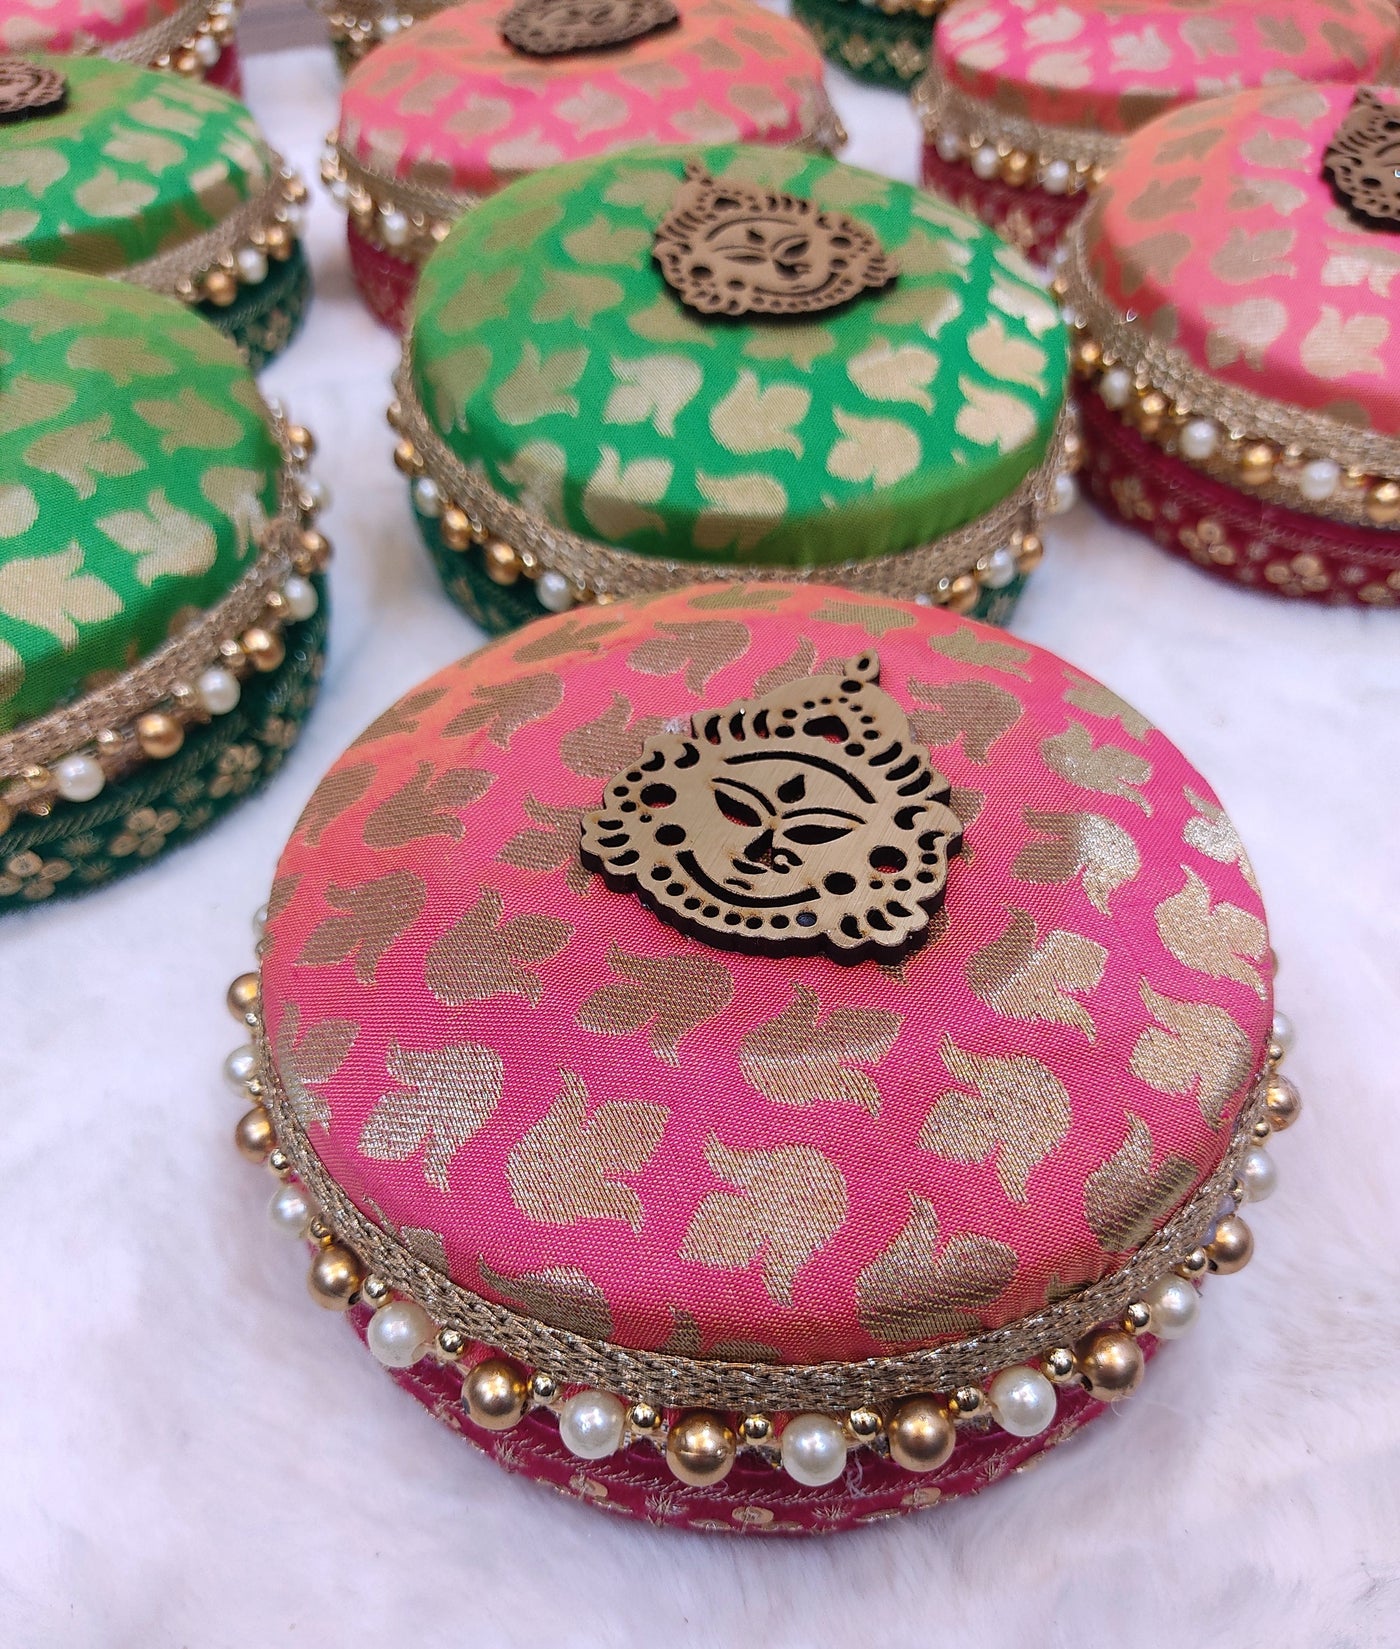 120 Rs each on Purchasing in bulk 📱at 8619550223 steel gift box LAMANSH® (5 inch) Stainless Steel Designer Ladoo Box for Return Gifting 🎁 | Gift Boxes with durga mata mdf cutout for Wedding Pooja Return Gifting & Favours